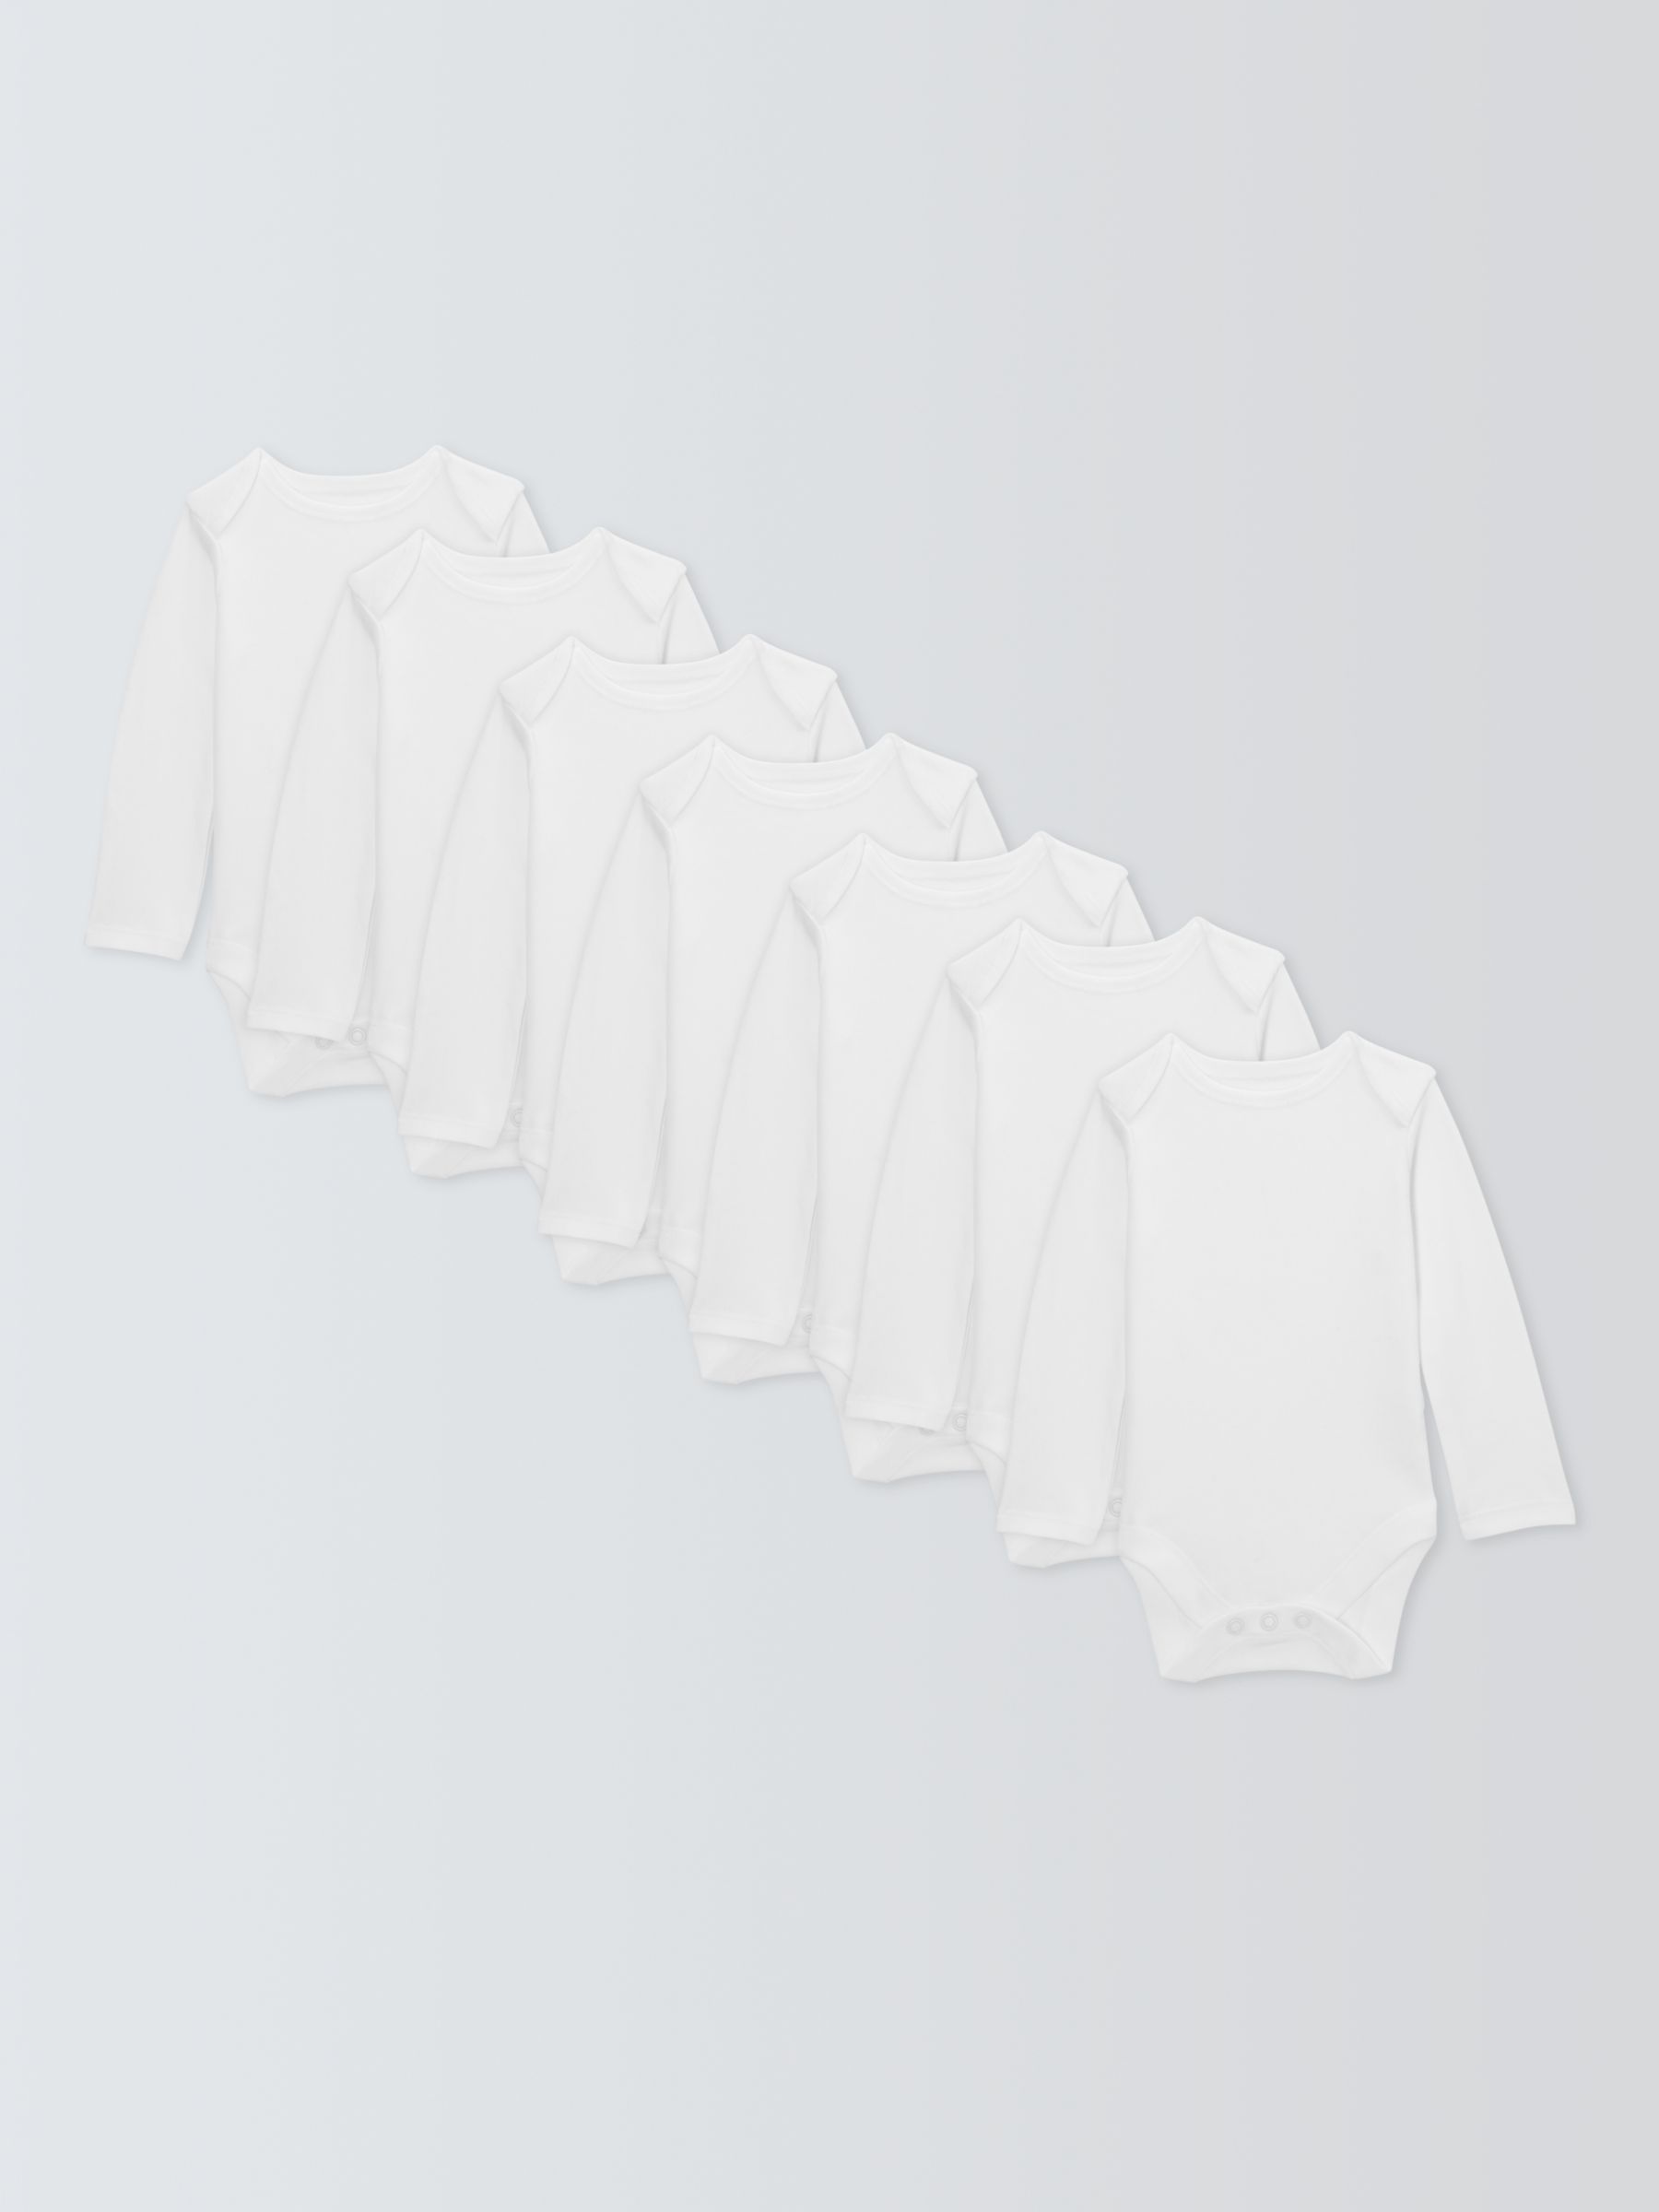 Buy John Lewis ANYDAY Baby Long Sleeve Bodysuits, Pack of 7, White Online at johnlewis.com